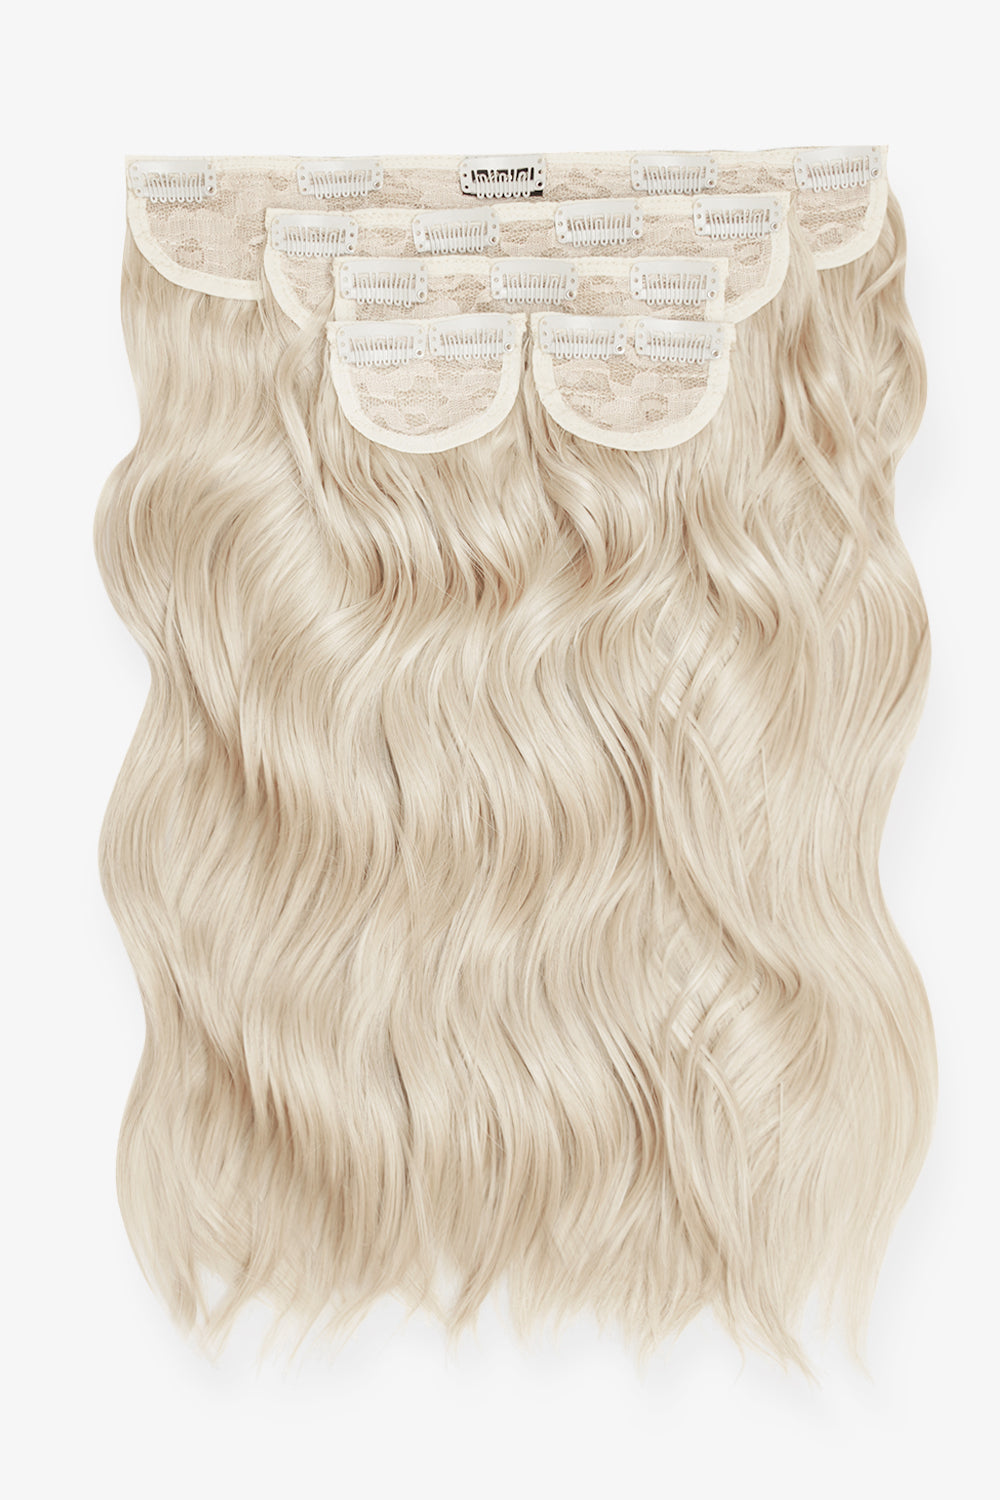 Super Thick 16’’ 5 Piece Brushed Out Wave Clip In Hair Extensions - Bleach Blonde